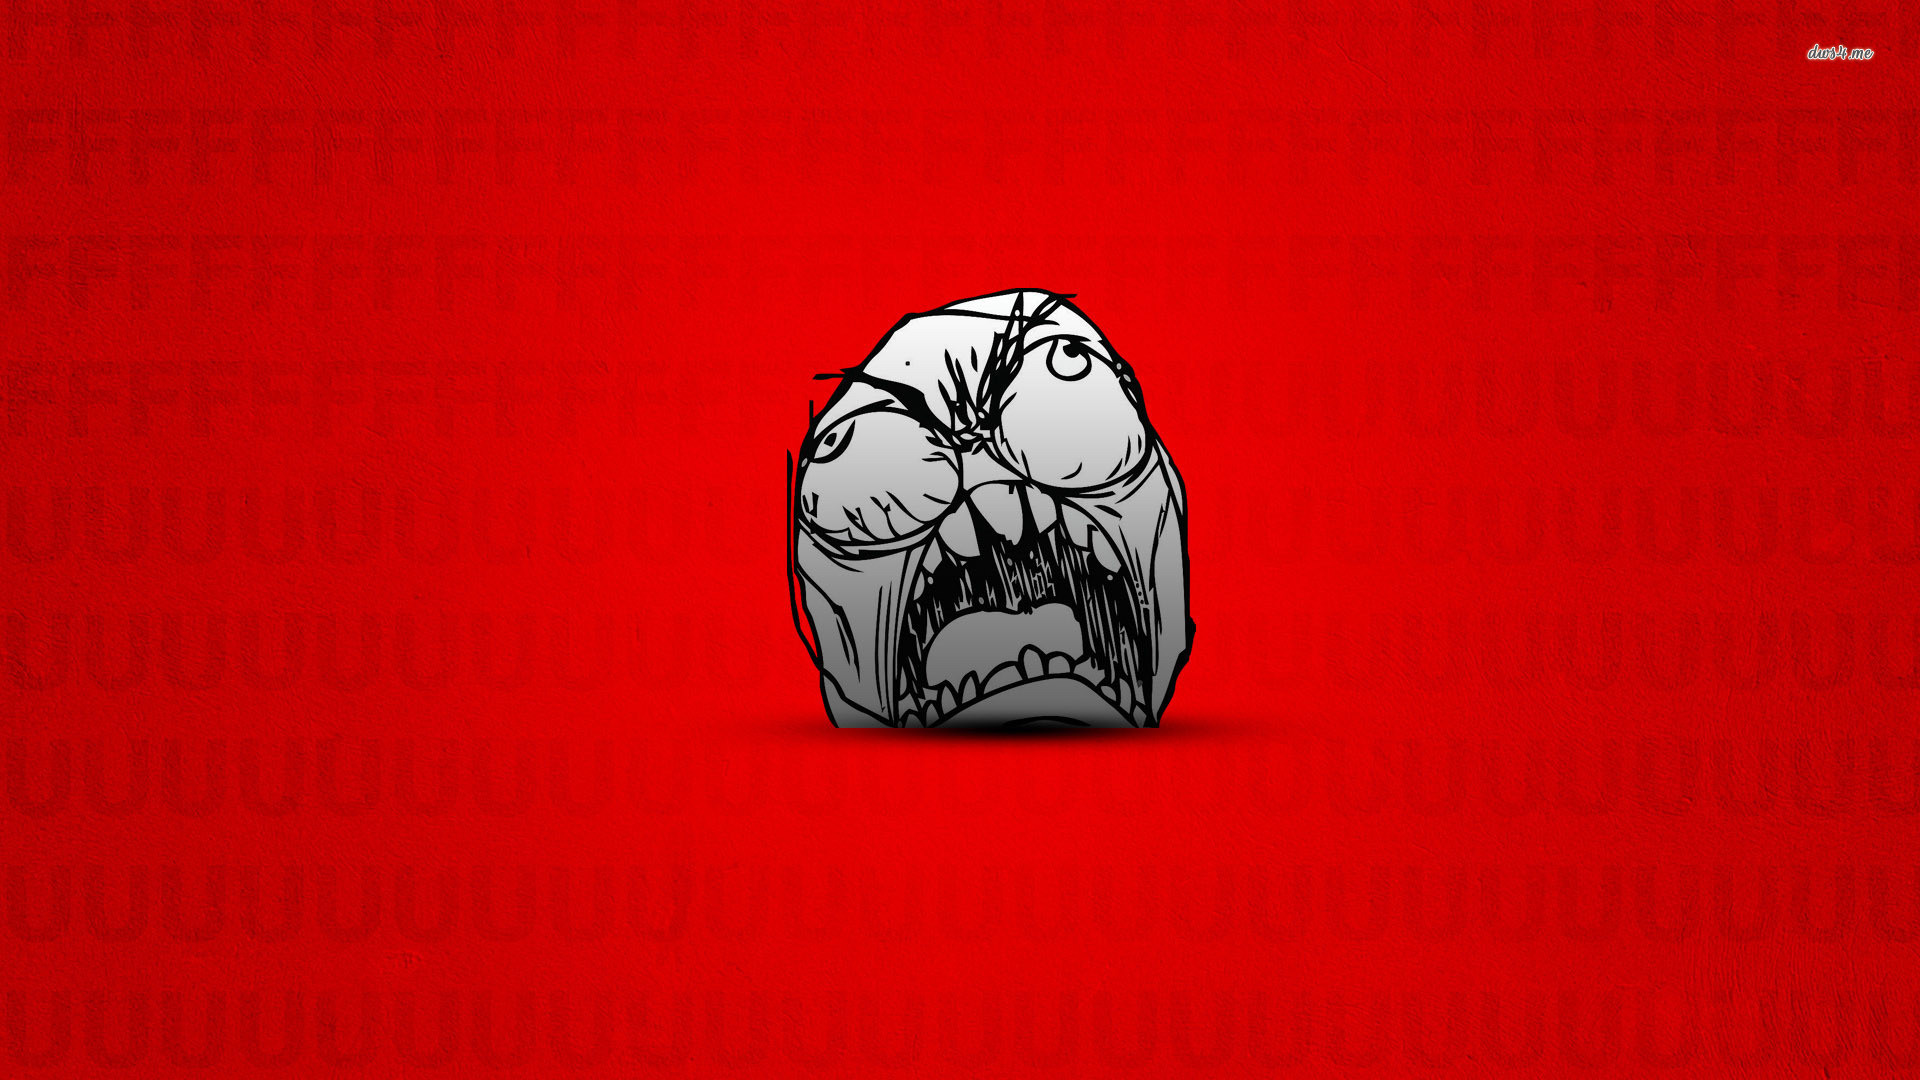 1920x1080 ... Rage guy on red background wallpaper  ...